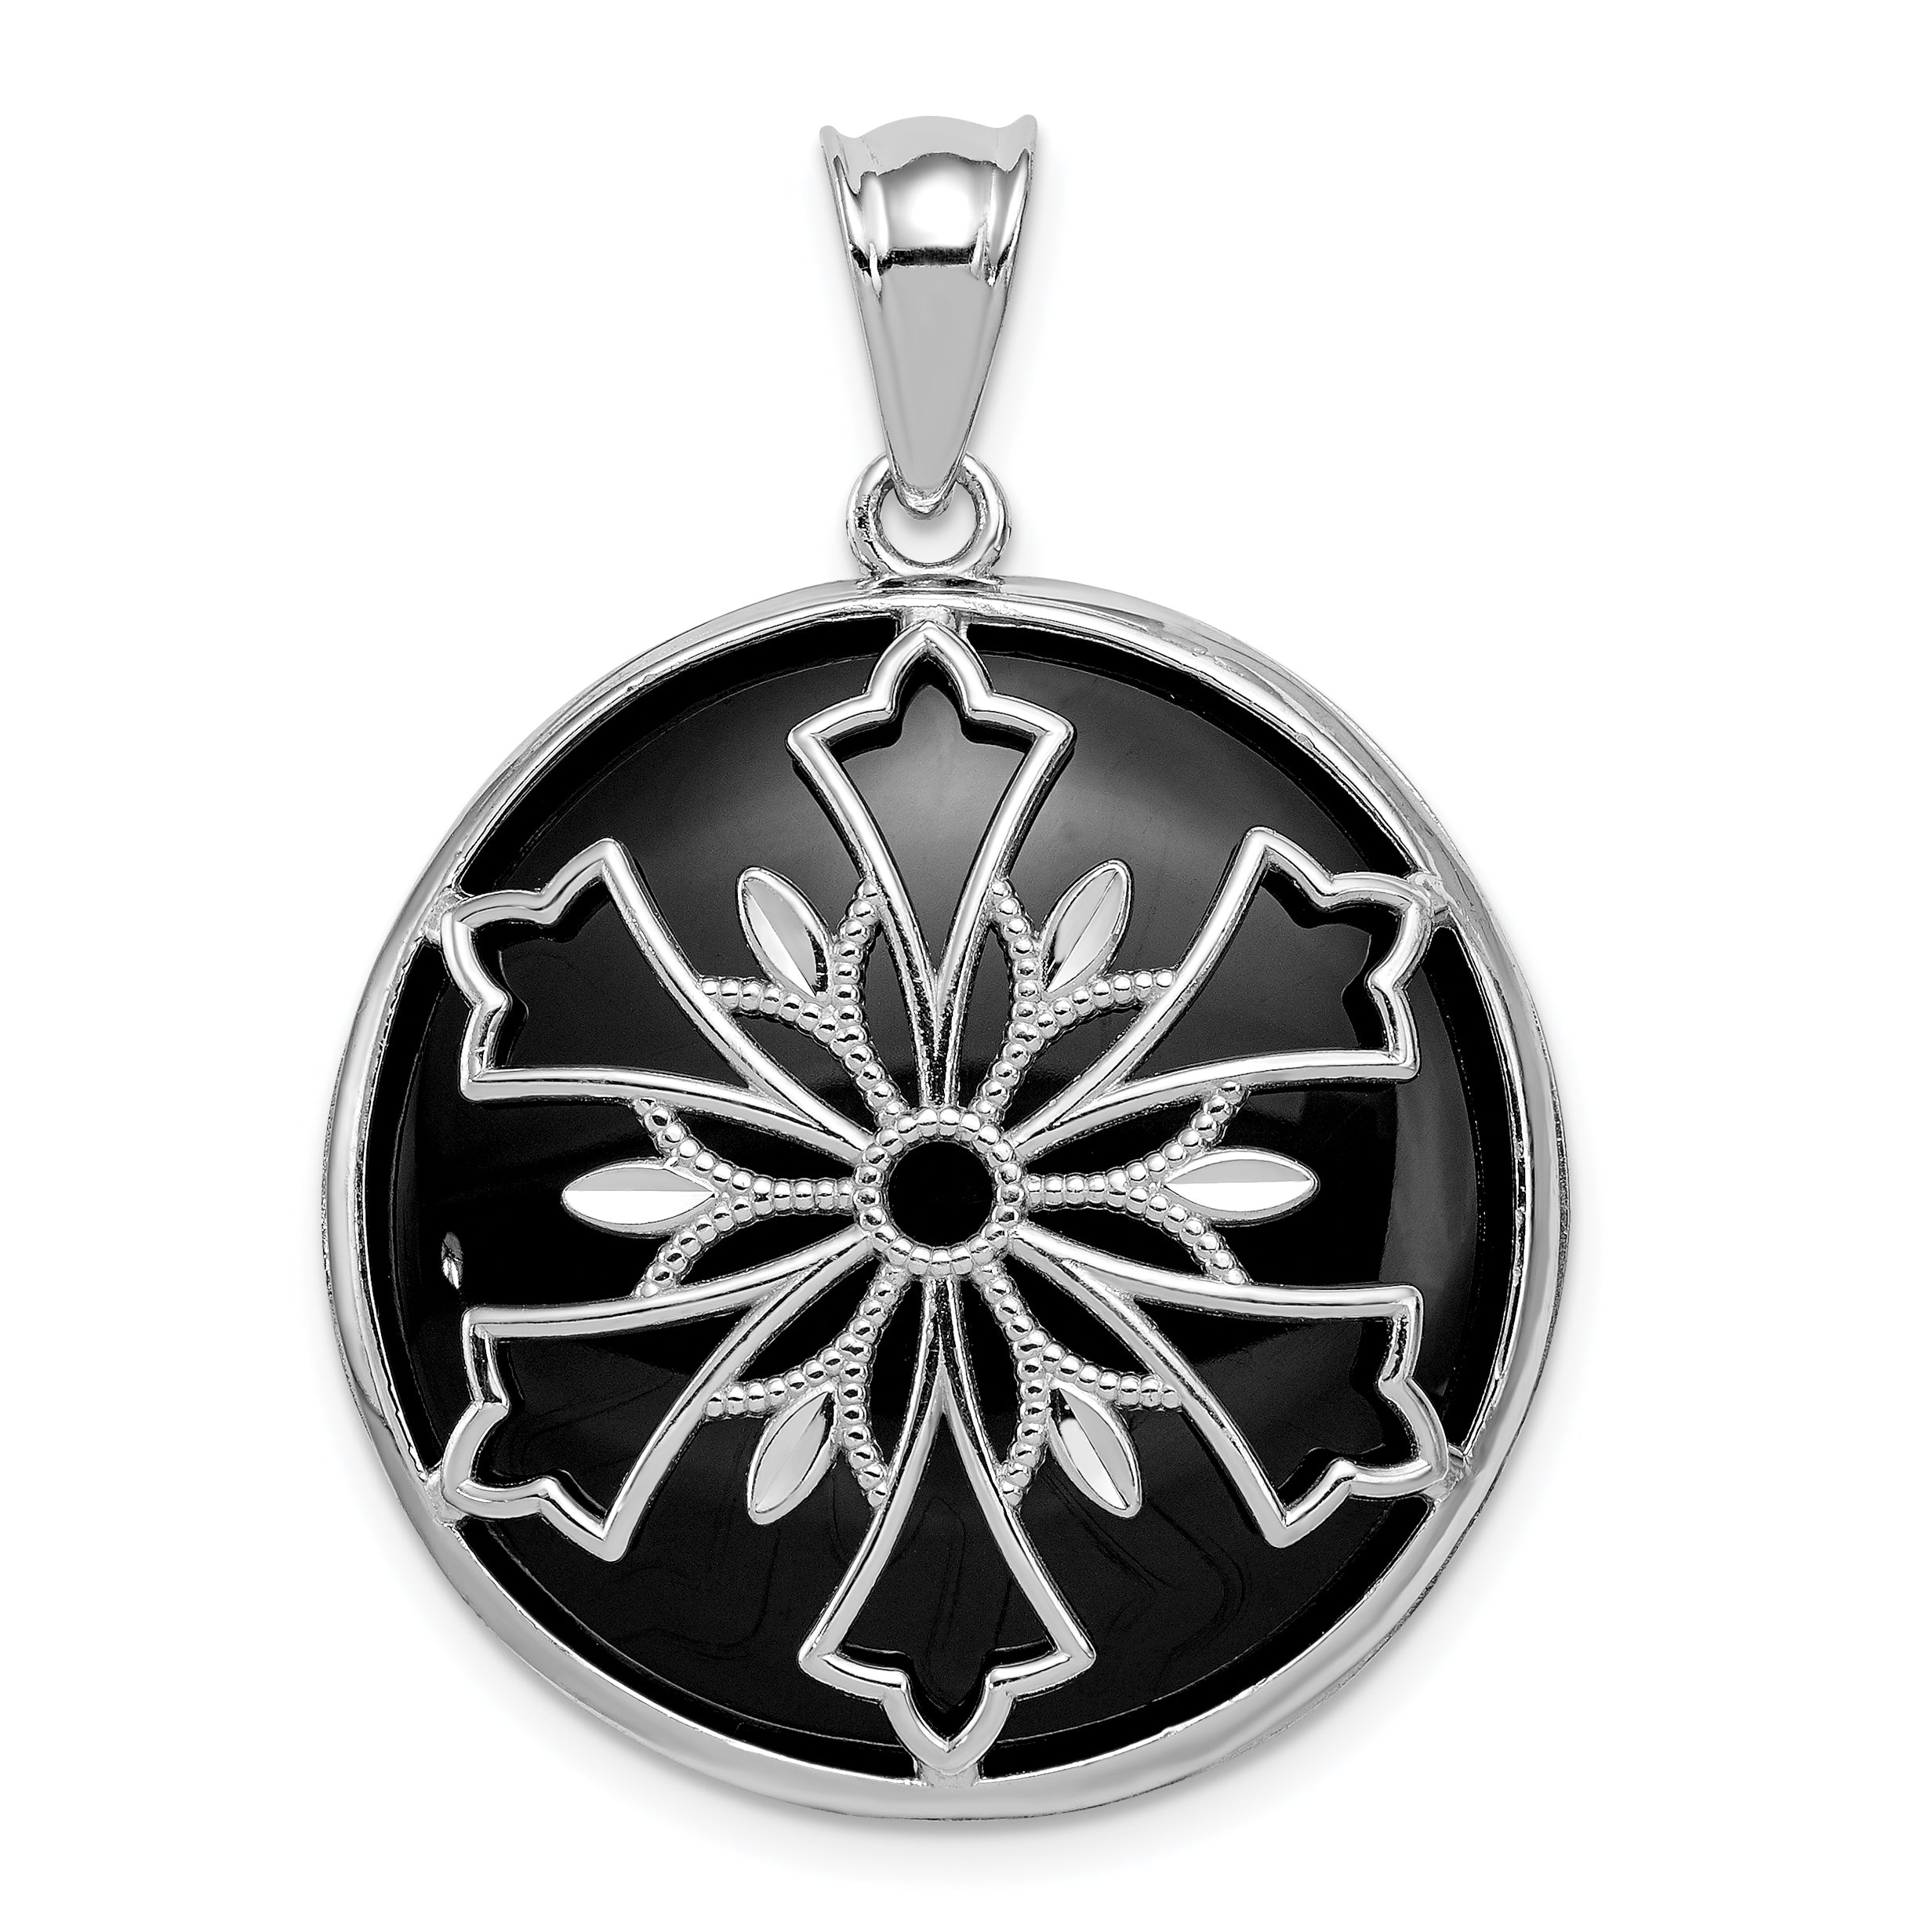 Sterling Silver Rhodium-plated Snowflake Diamond Cut Mother of Pearl and Onyx Reversible Pendant